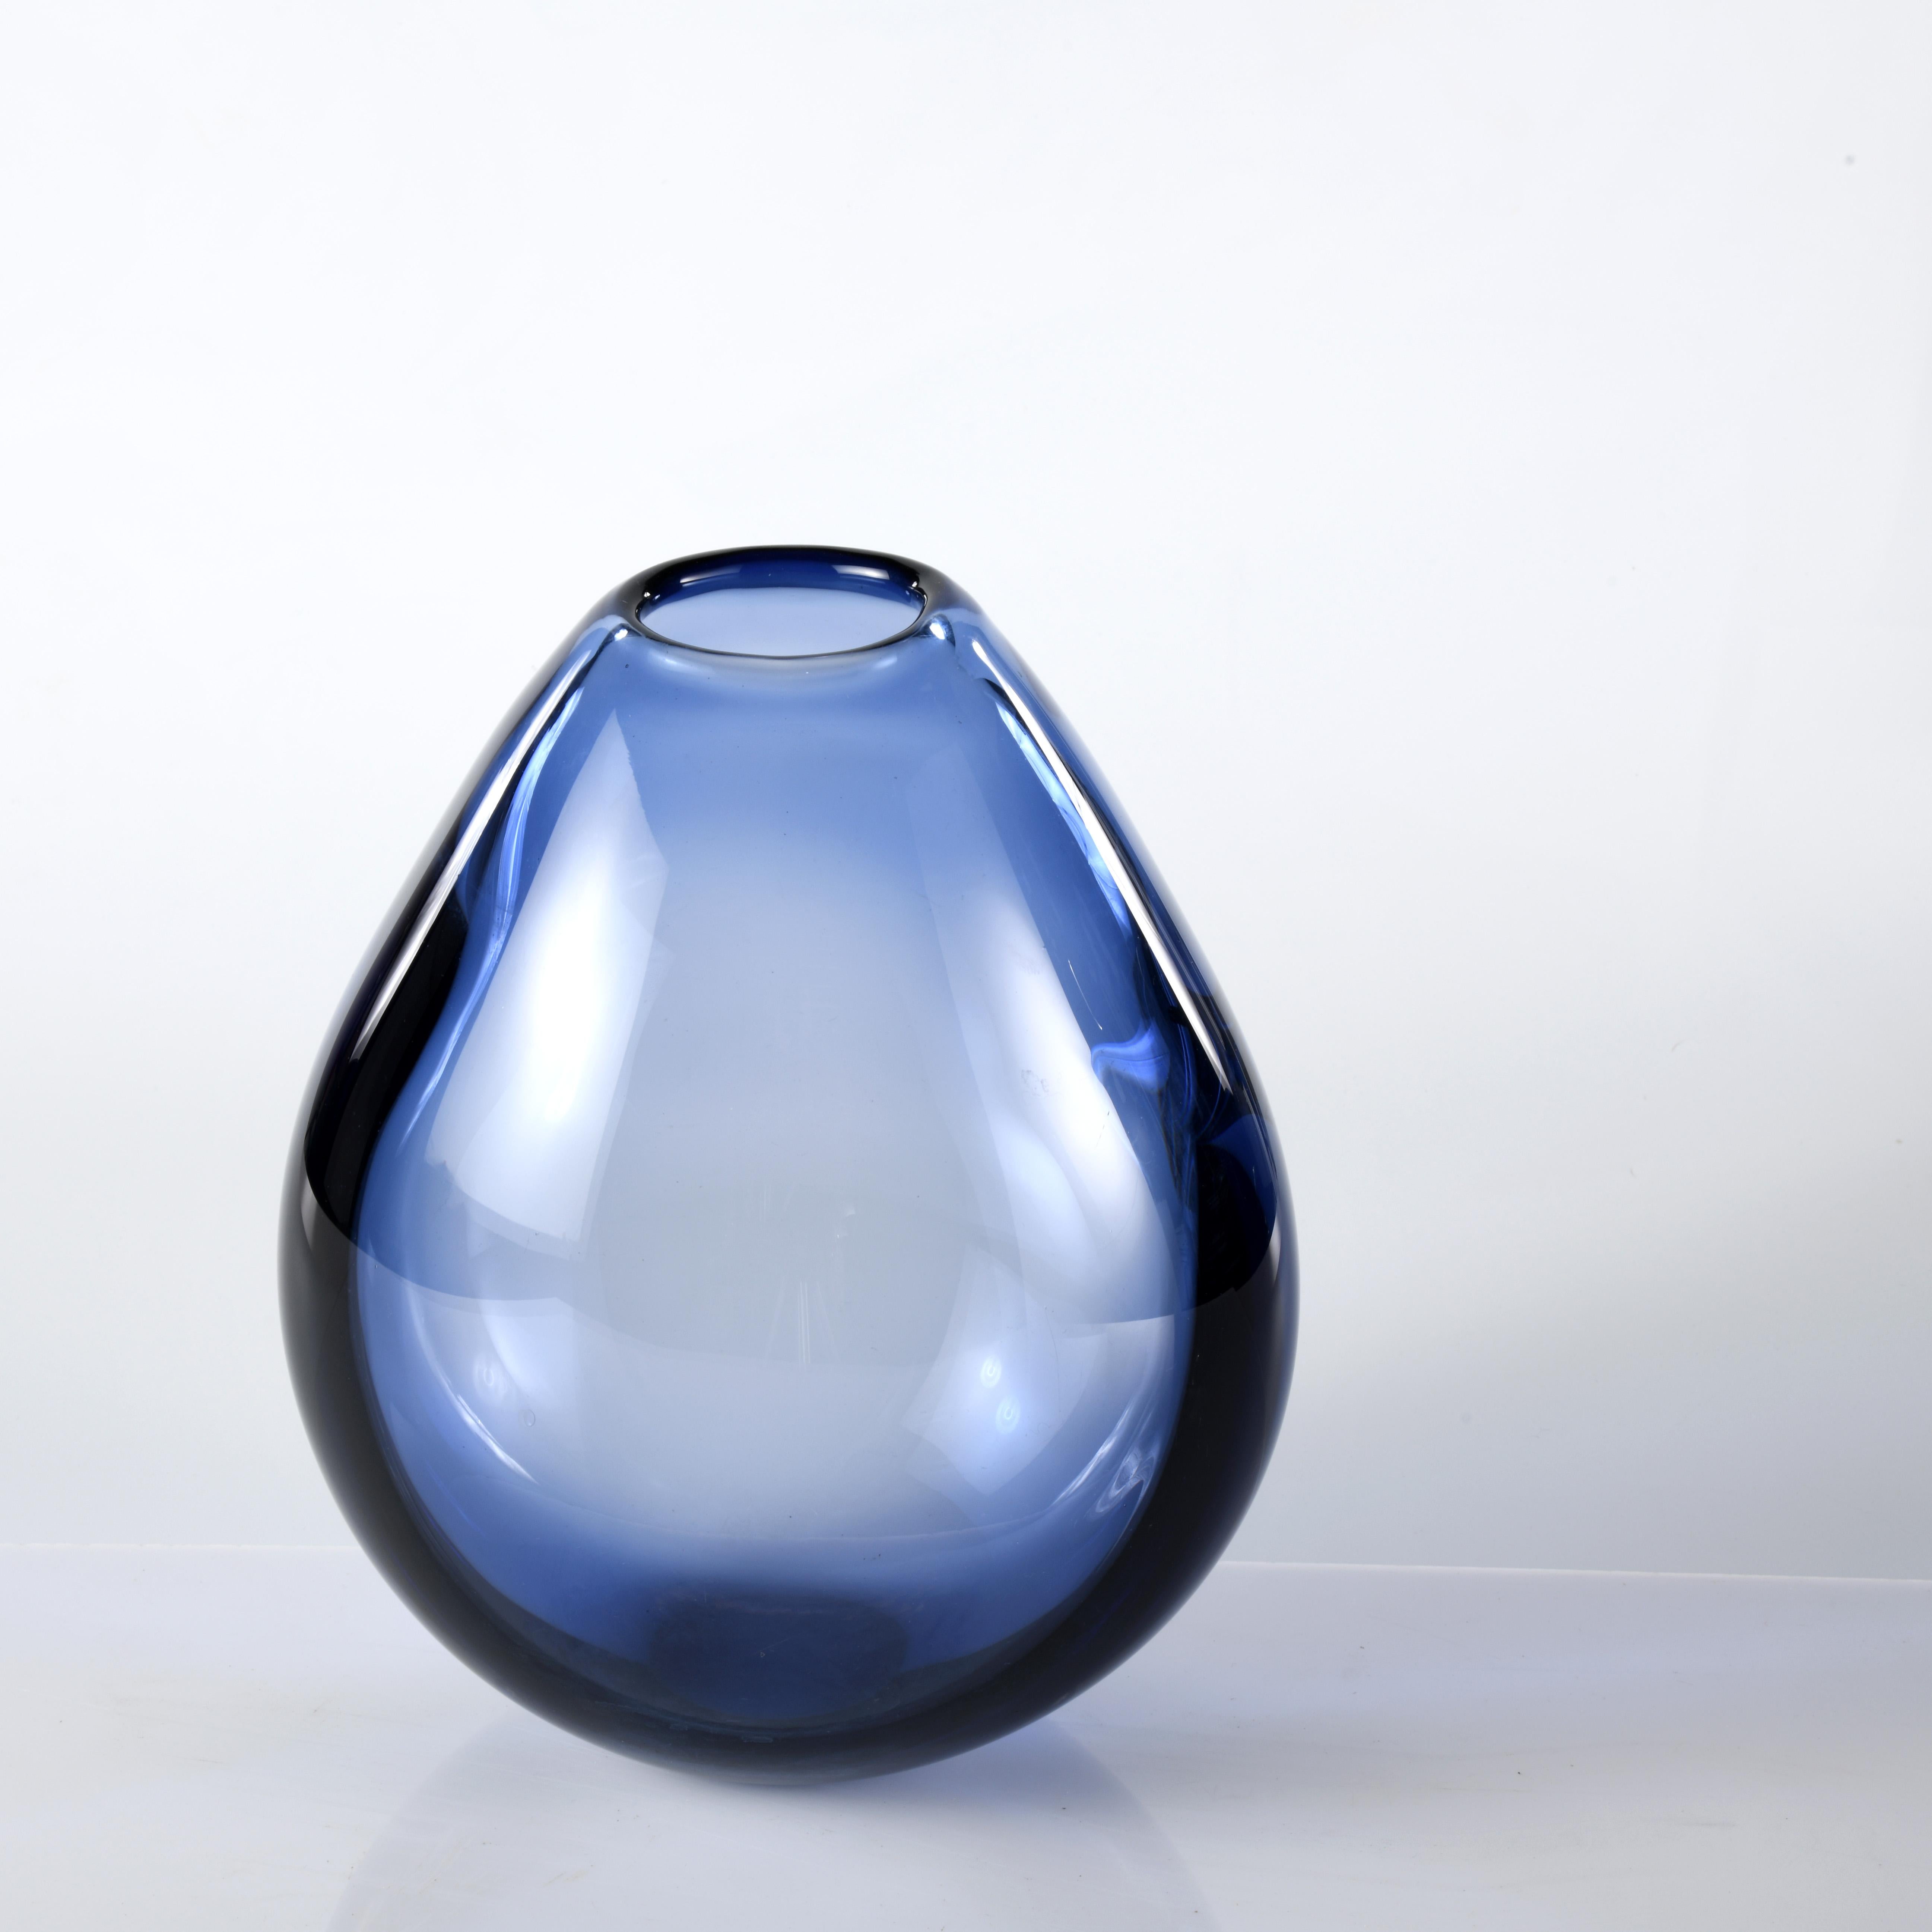 Large vase by Per Lutken for the Danish glass company Holmegaard in the 1960s. 
H: 25cm 15x20cm
Per Lutken was a famous Danish glassmaker who joined Holmegaard in 1942 and worked there until his death. He helped to revive the glassmaking industry,